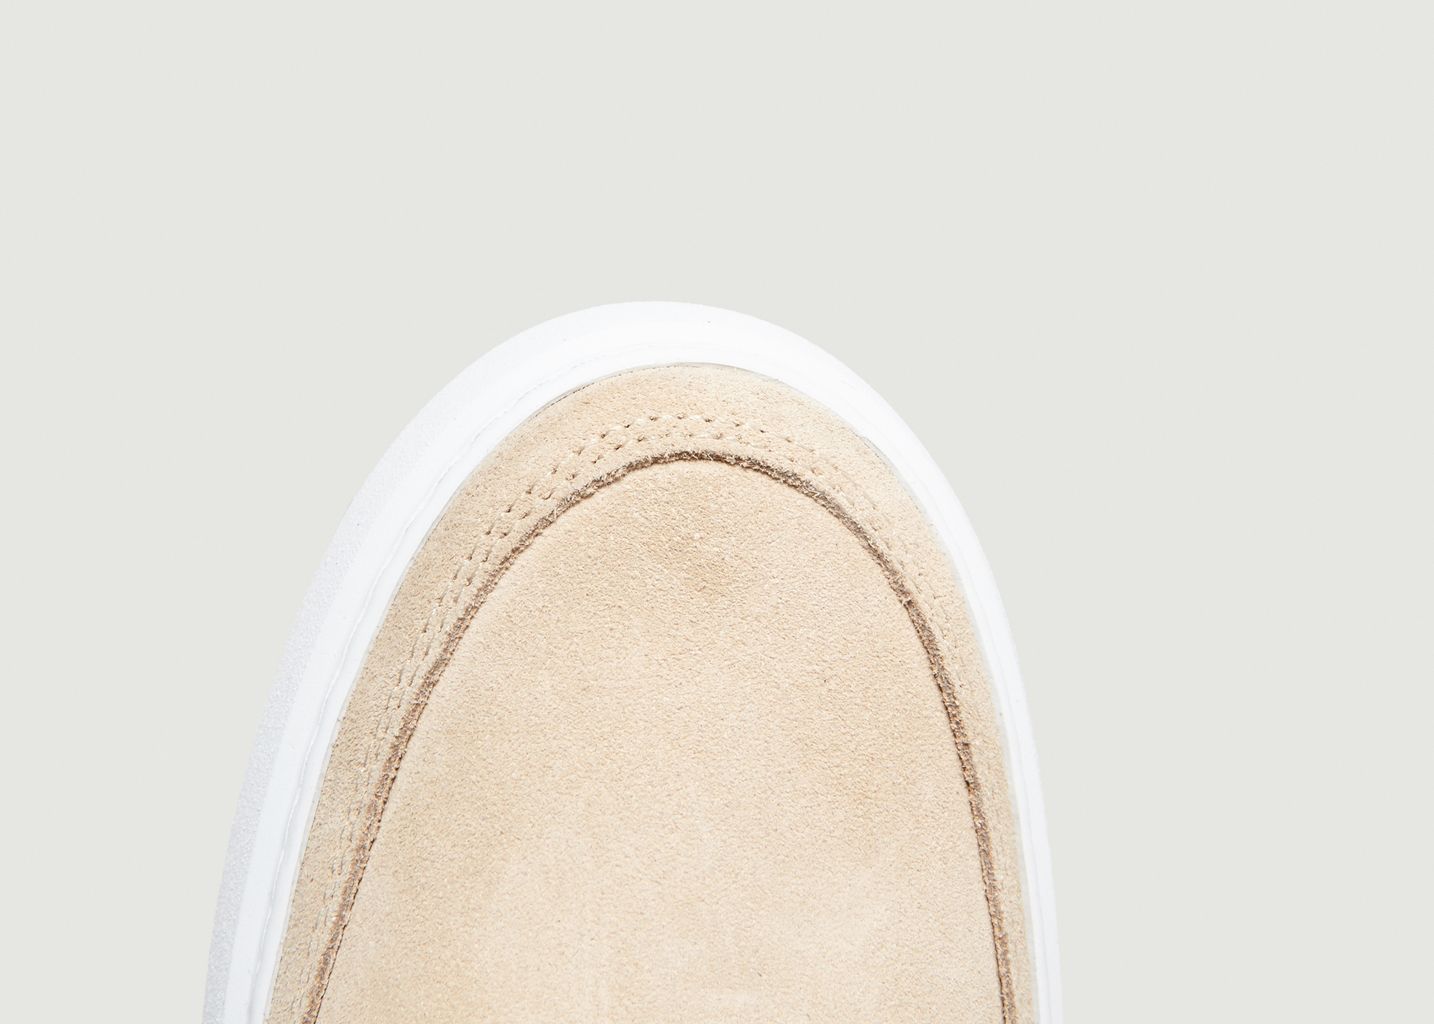 Sneakers Khromat - Filling Pieces